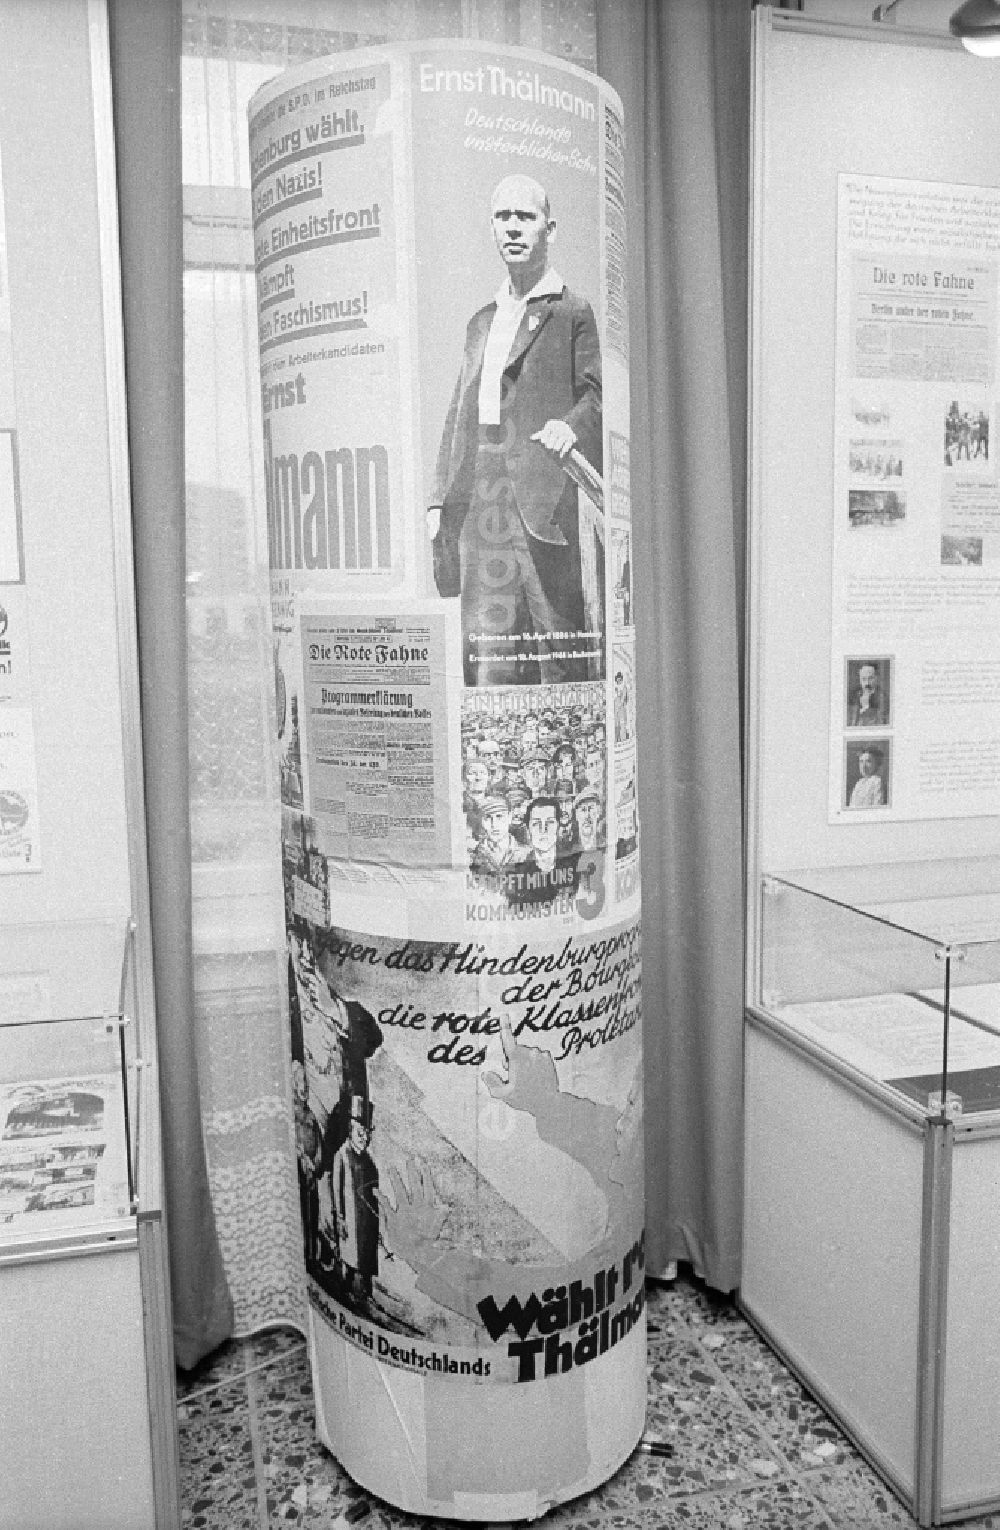 GDR photo archive: Berlin - Opening of the history cabinet of today's House of Liberation in Leninallee, today's Landsberger Allee 563 in the district Marzahn in Berlin, the former capital of the GDR, German Democratic Republic. Column with posters about Ernst Thaelmann in the exhibition